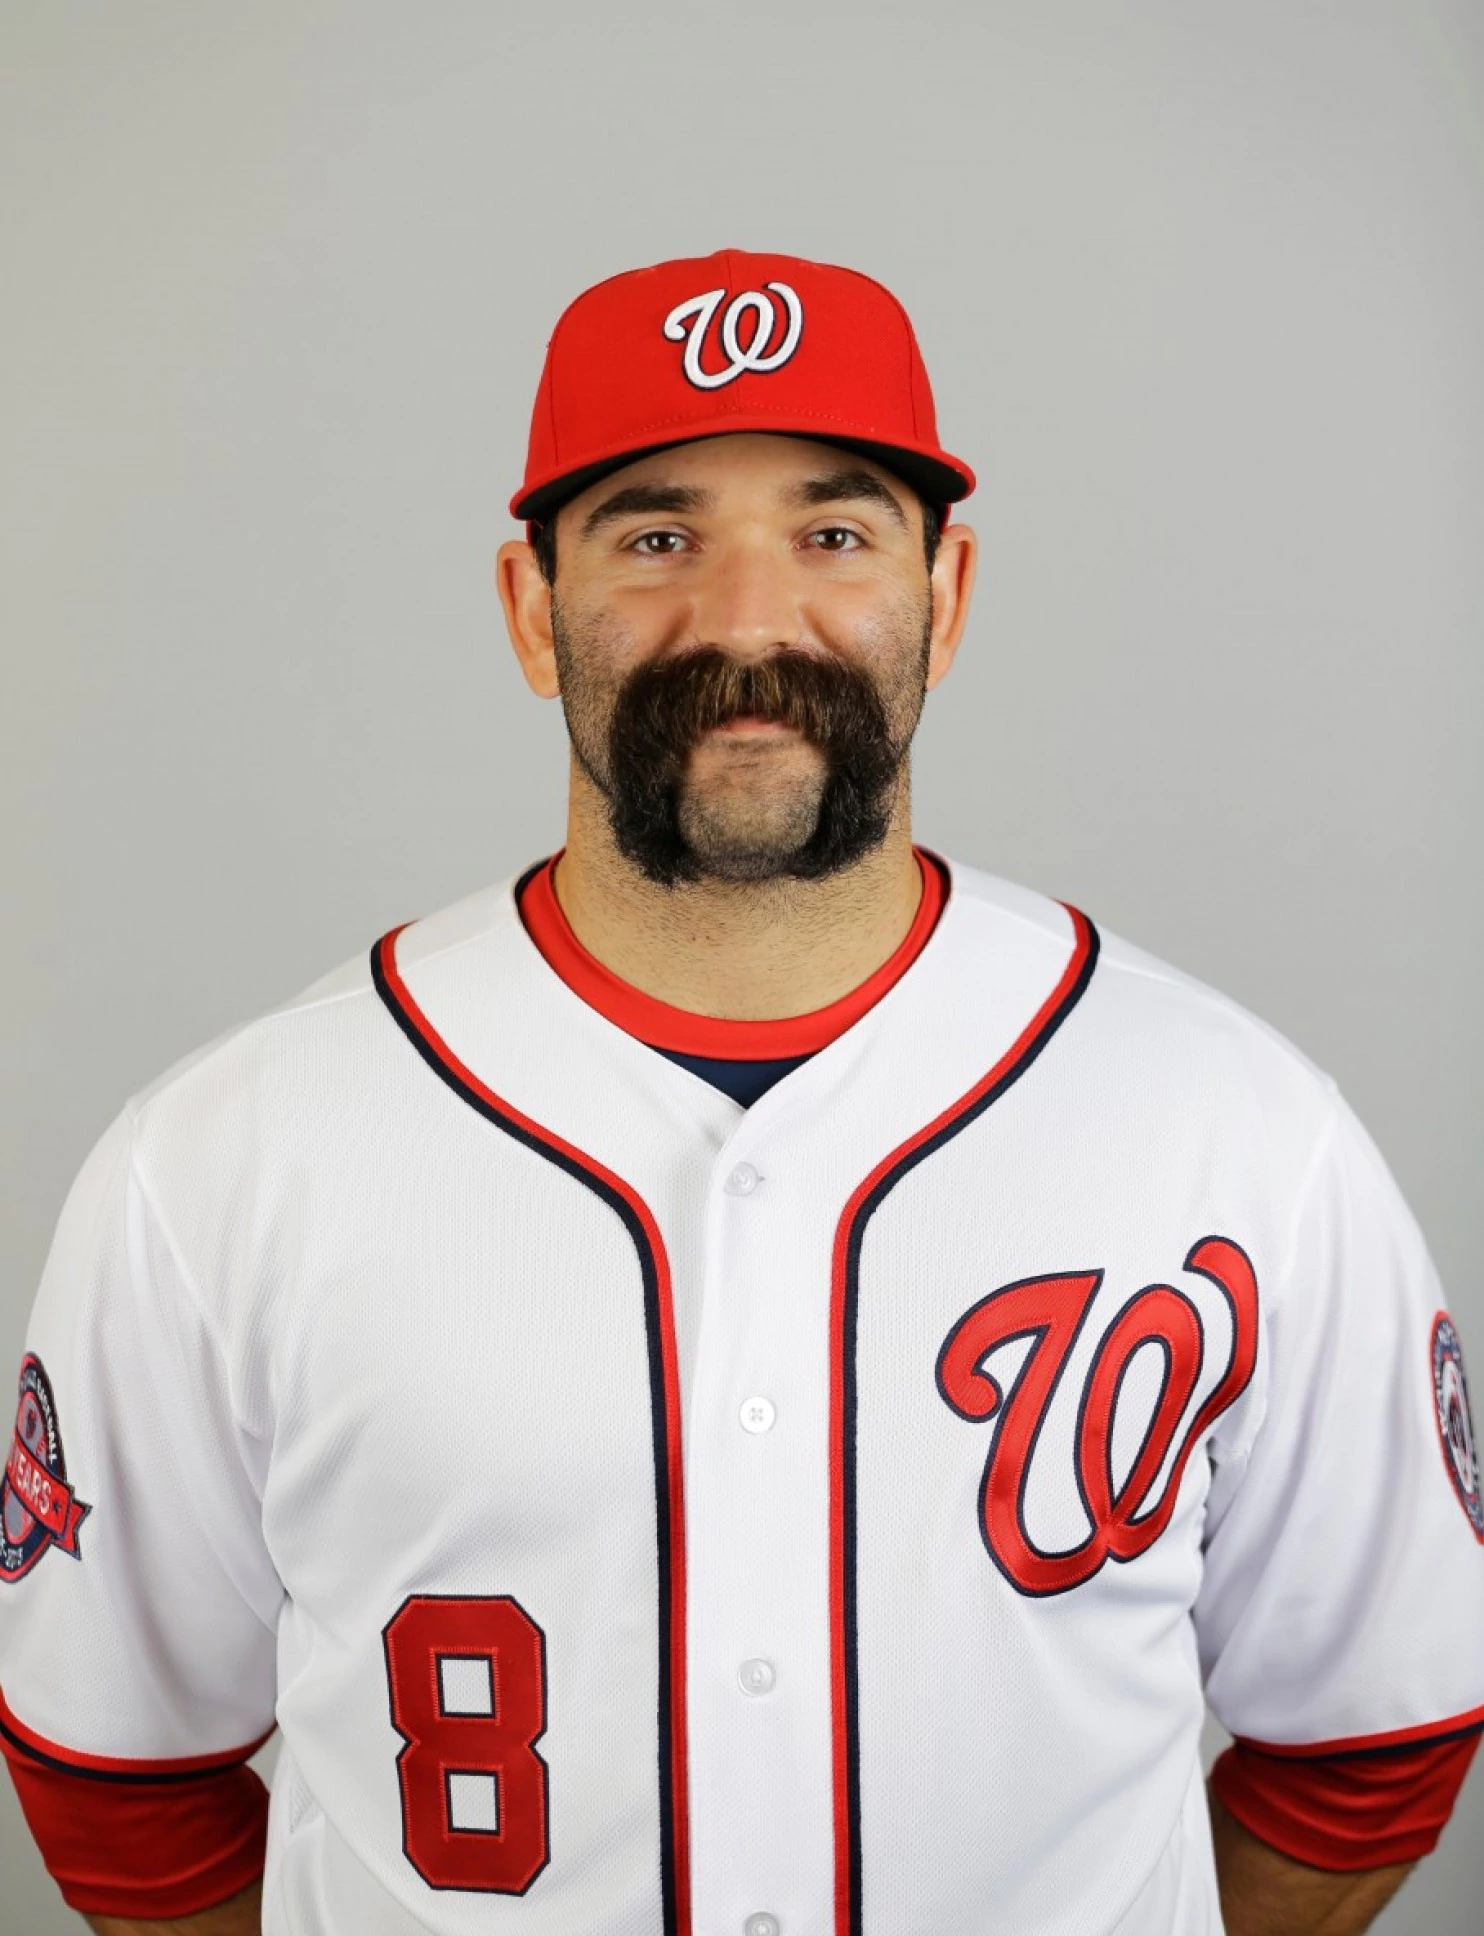 Danny Espinosa The best photos from 11 years of Nationals team picture